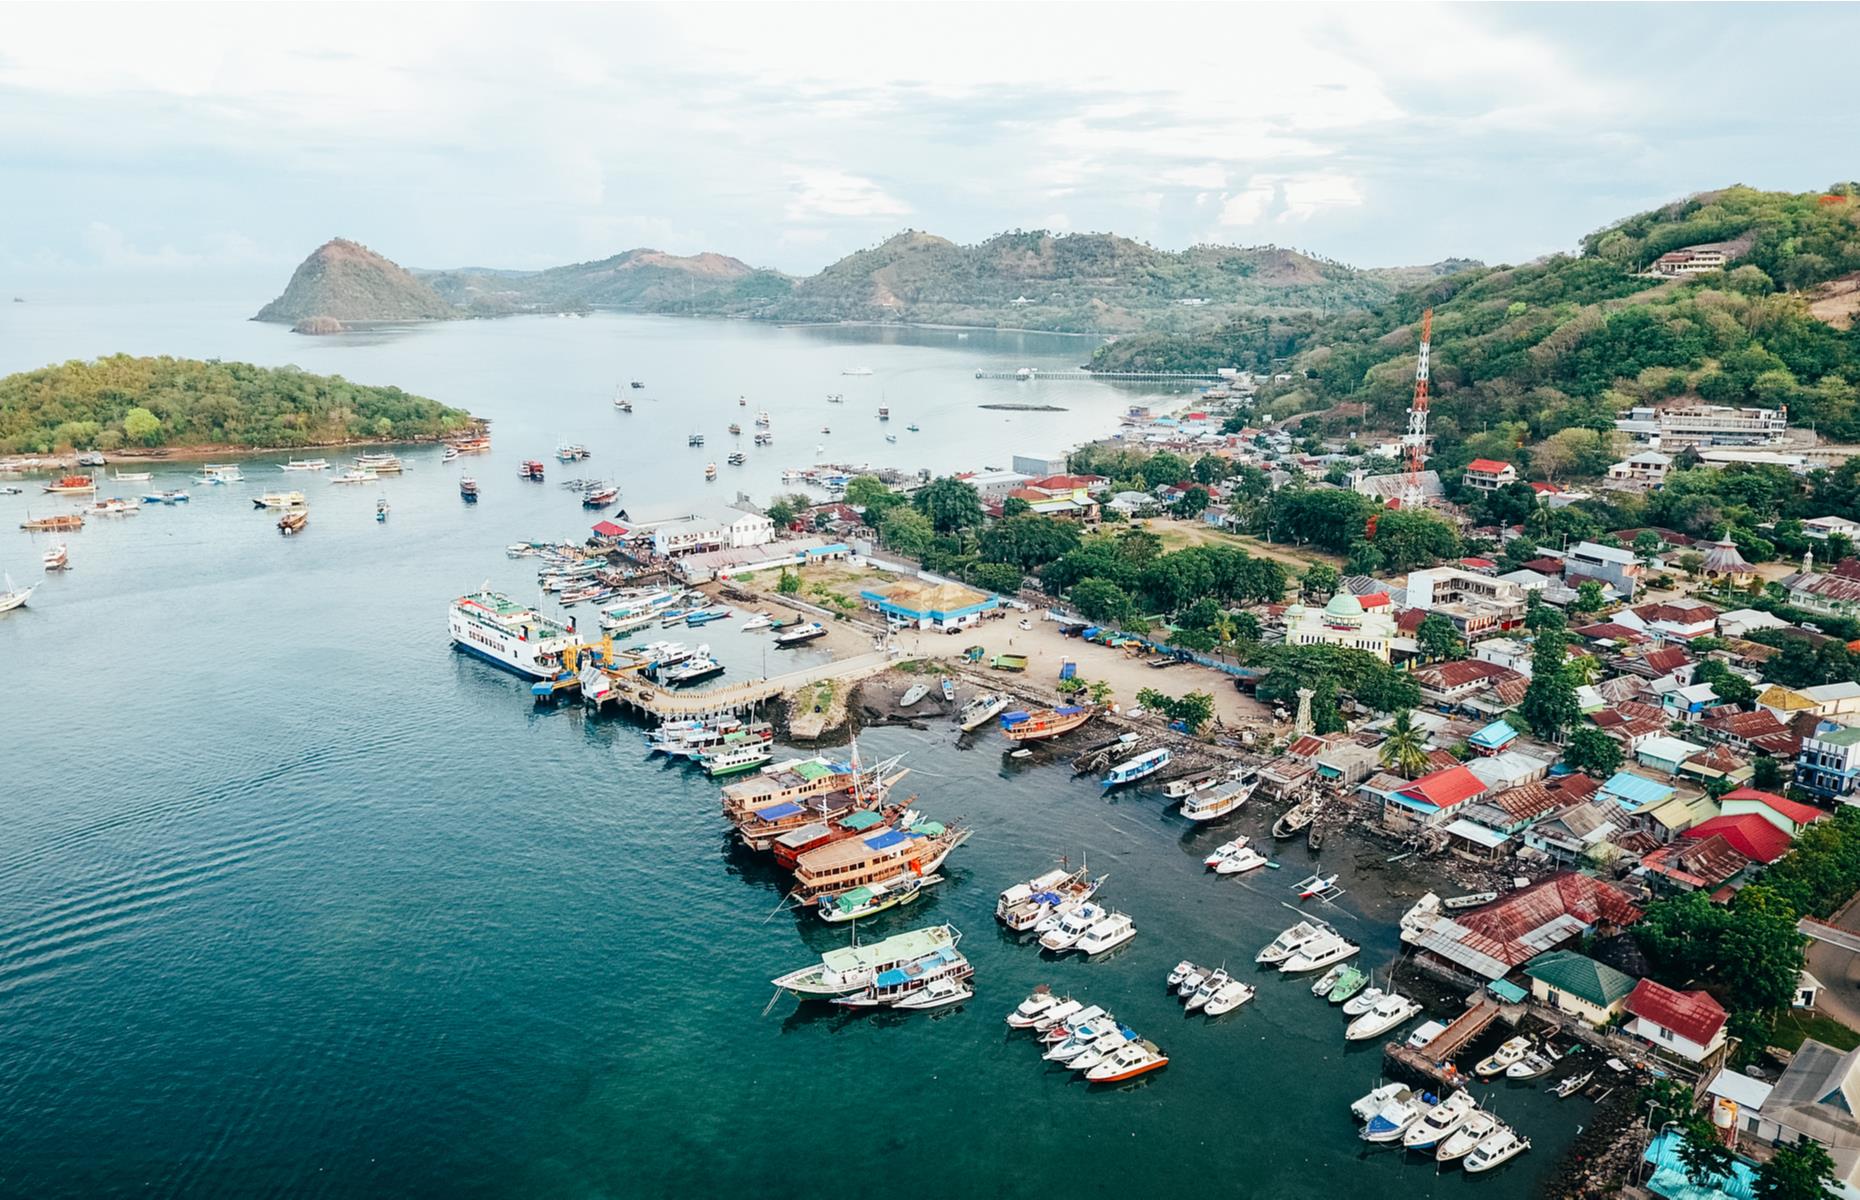 Spotted with colourful fishing boats and surrounded by verdant green hills, Labuan Bajo, a small fishing village turned bustling town, still retains plenty of its historic charm. Located on the westernmost region of Flores in Indonesia, it’s usually a popular spot with visitors, many of whom choose to take trips across to the nearby Komodo Island and Rinca Island.